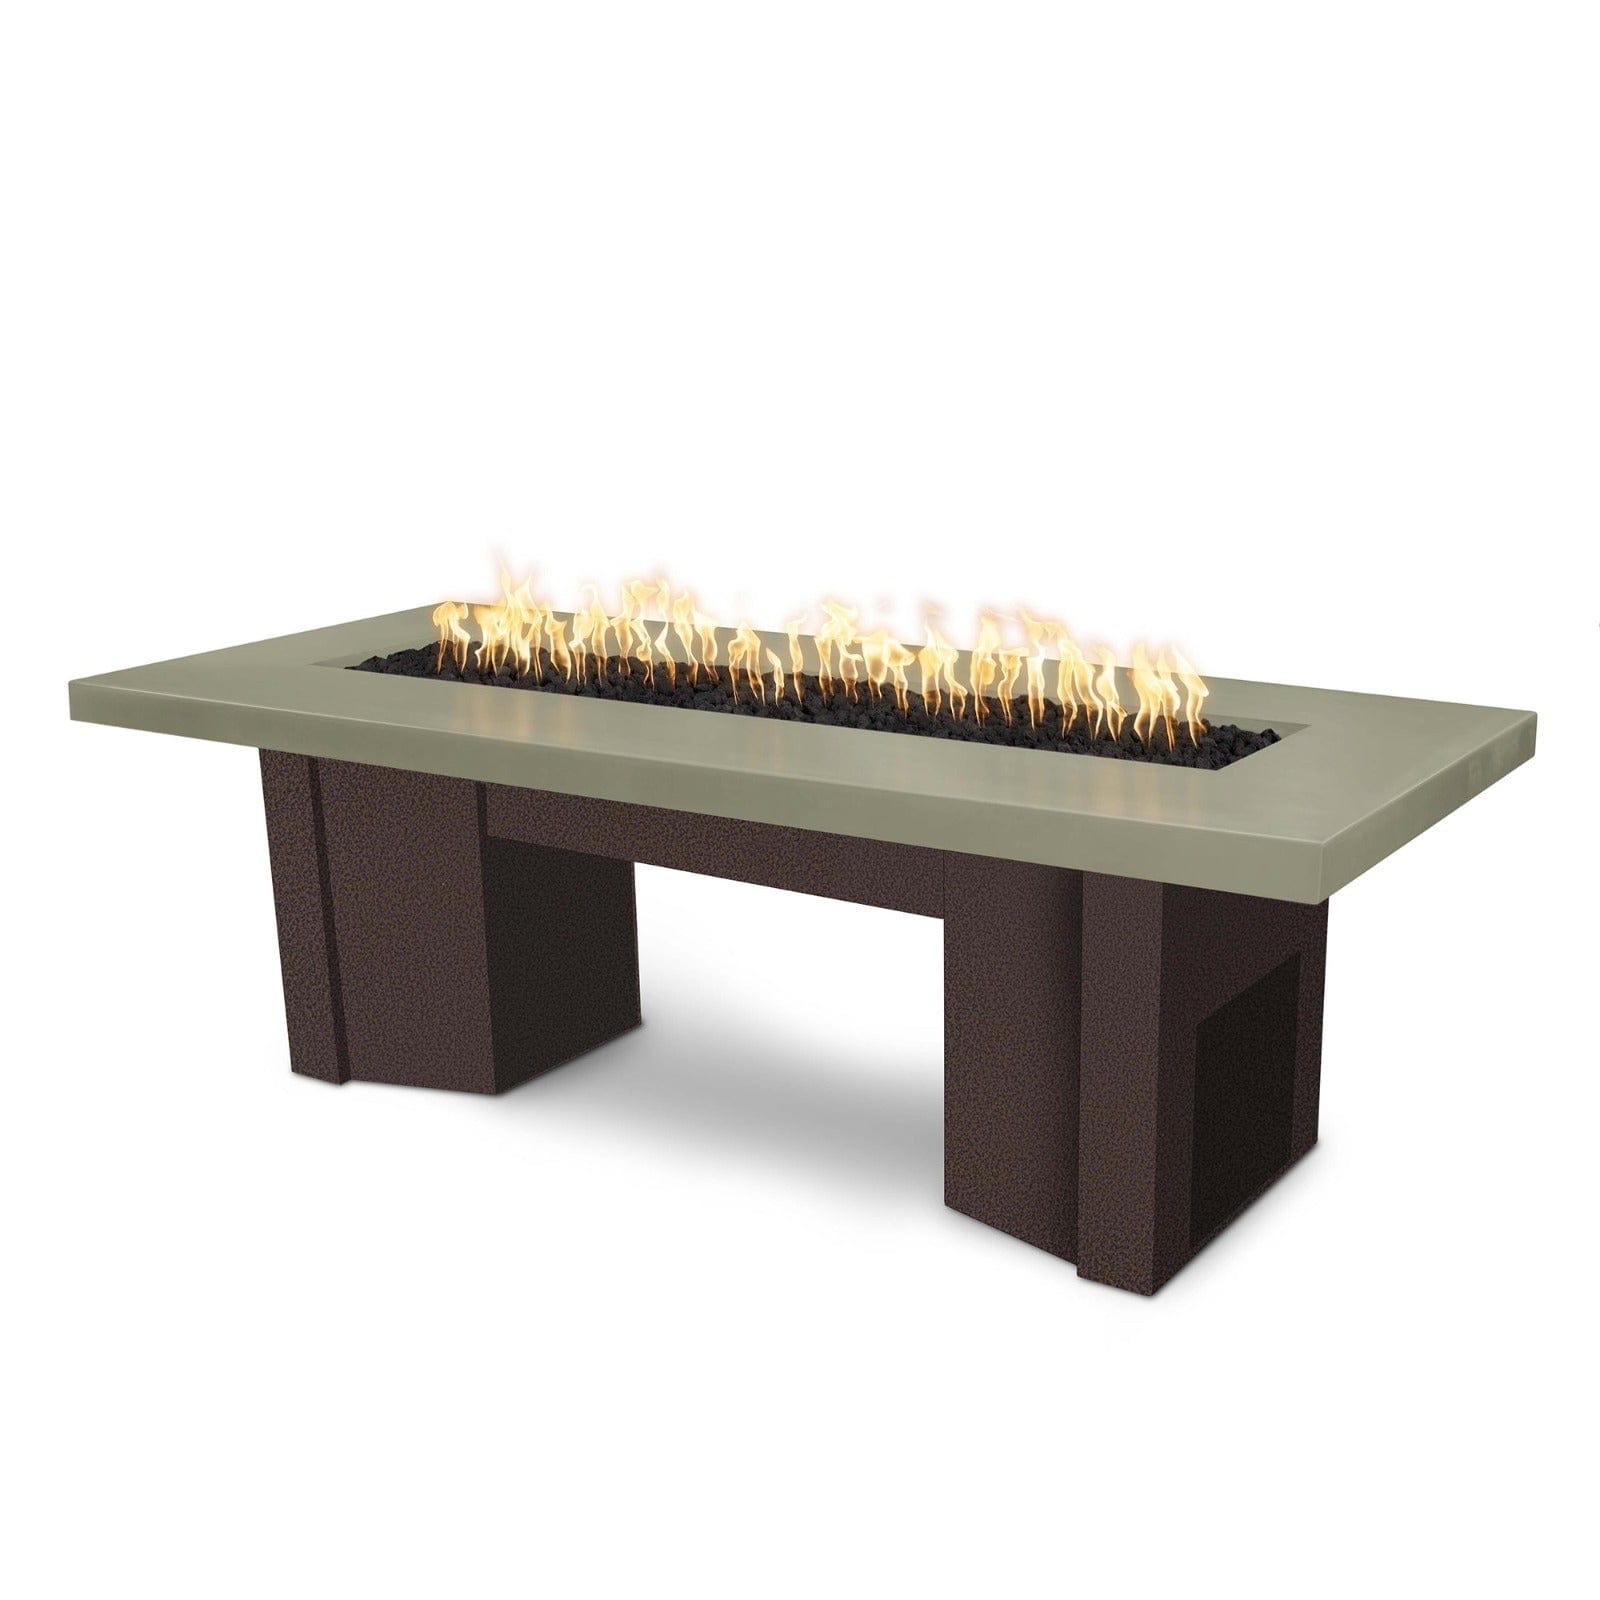 The Outdoor Plus Fire Features Ash (-ASH) / Copper Vein Powder Coated Steel (-CPV) The Outdoor Plus 60" Alameda Fire Table Smooth Concrete in Liquid Propane - 12V Electronic Ignition / OPT-ALMGFRC60E12V-LP